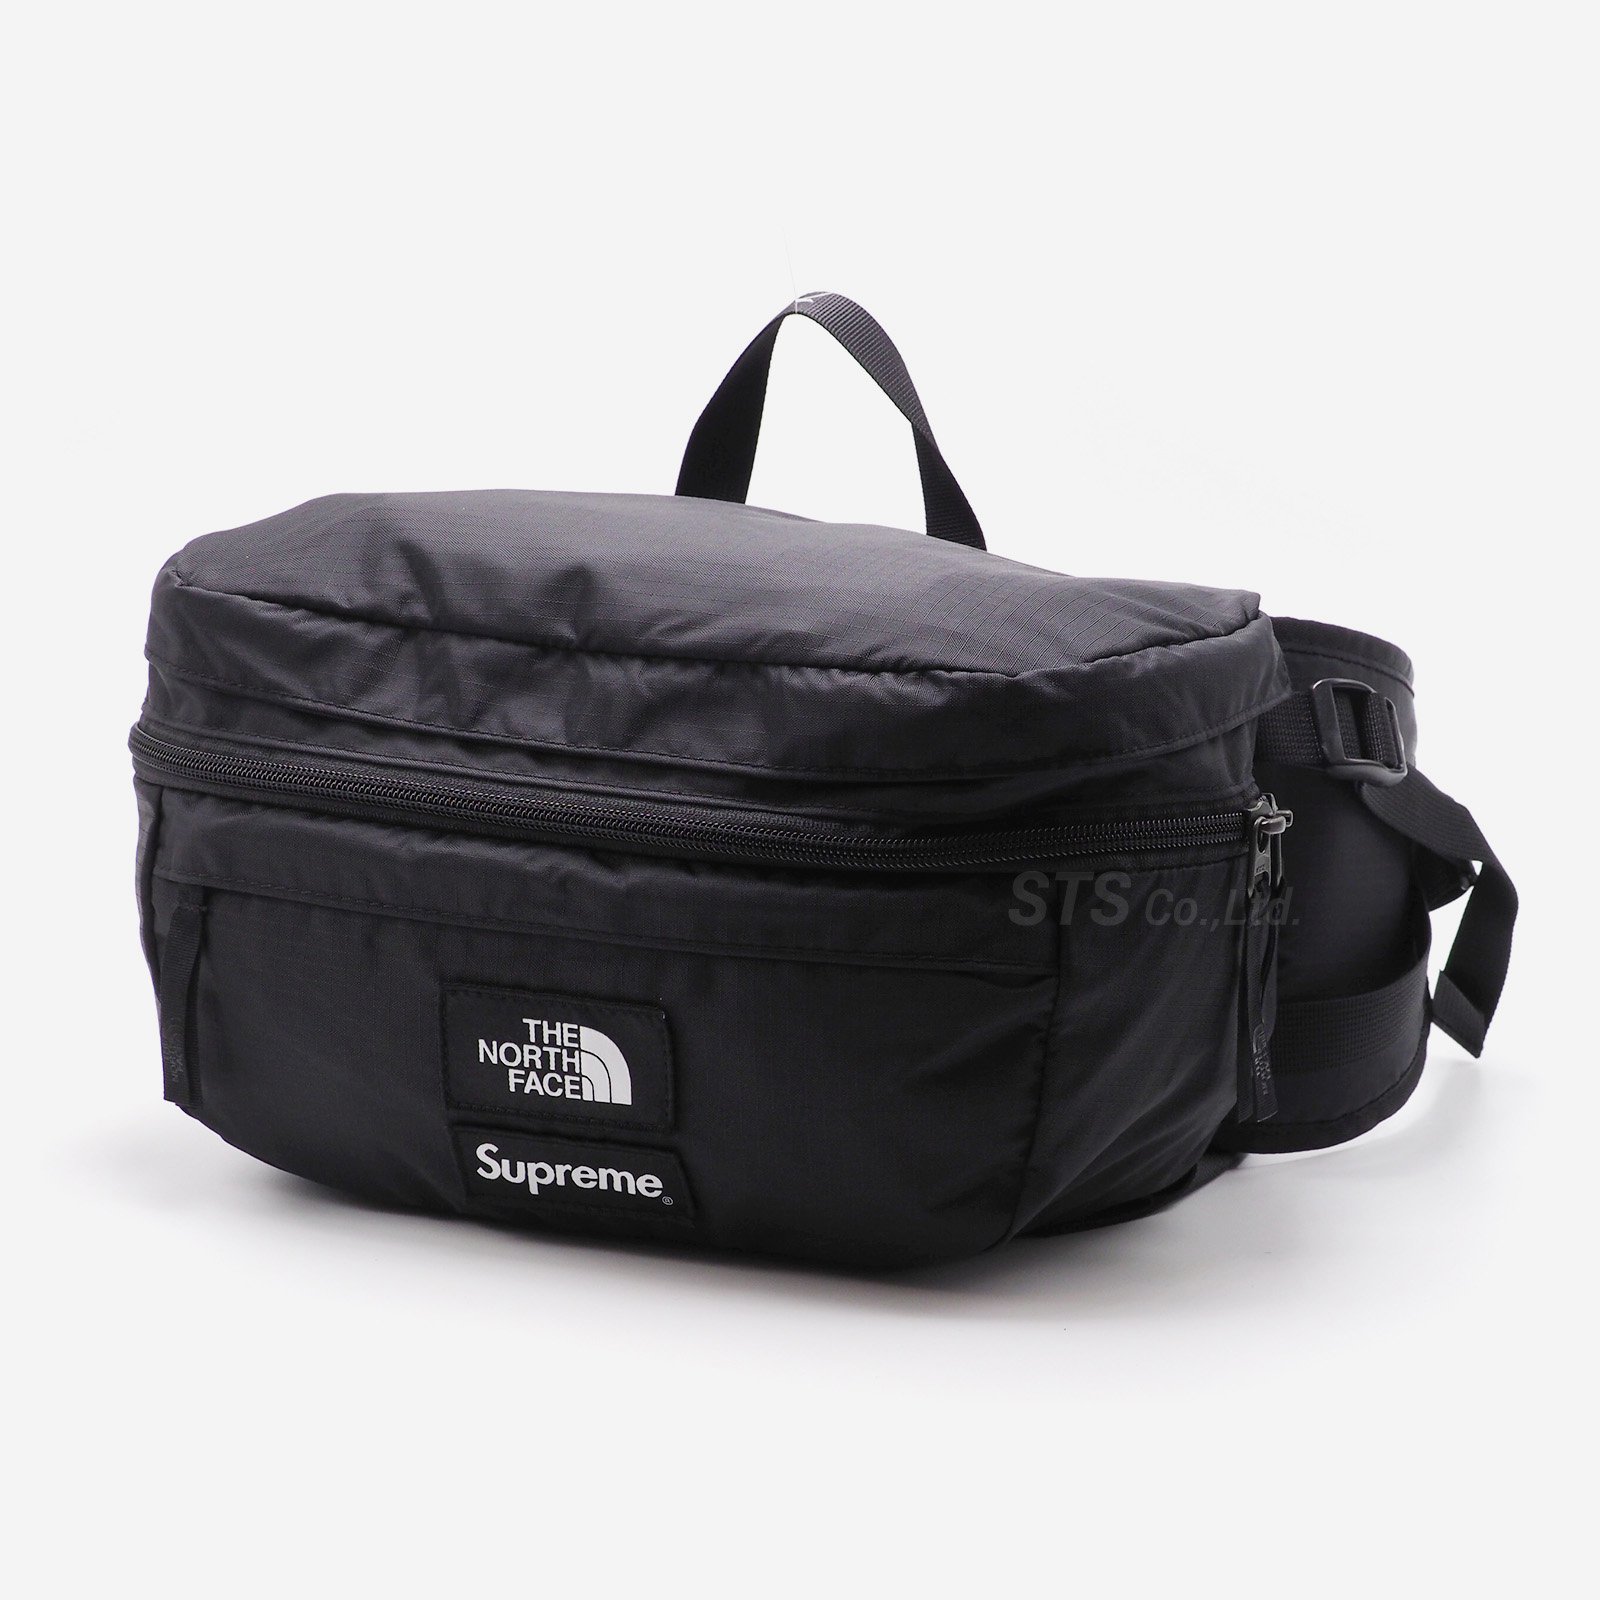 Supreme The North Face Backpack ＋Waist